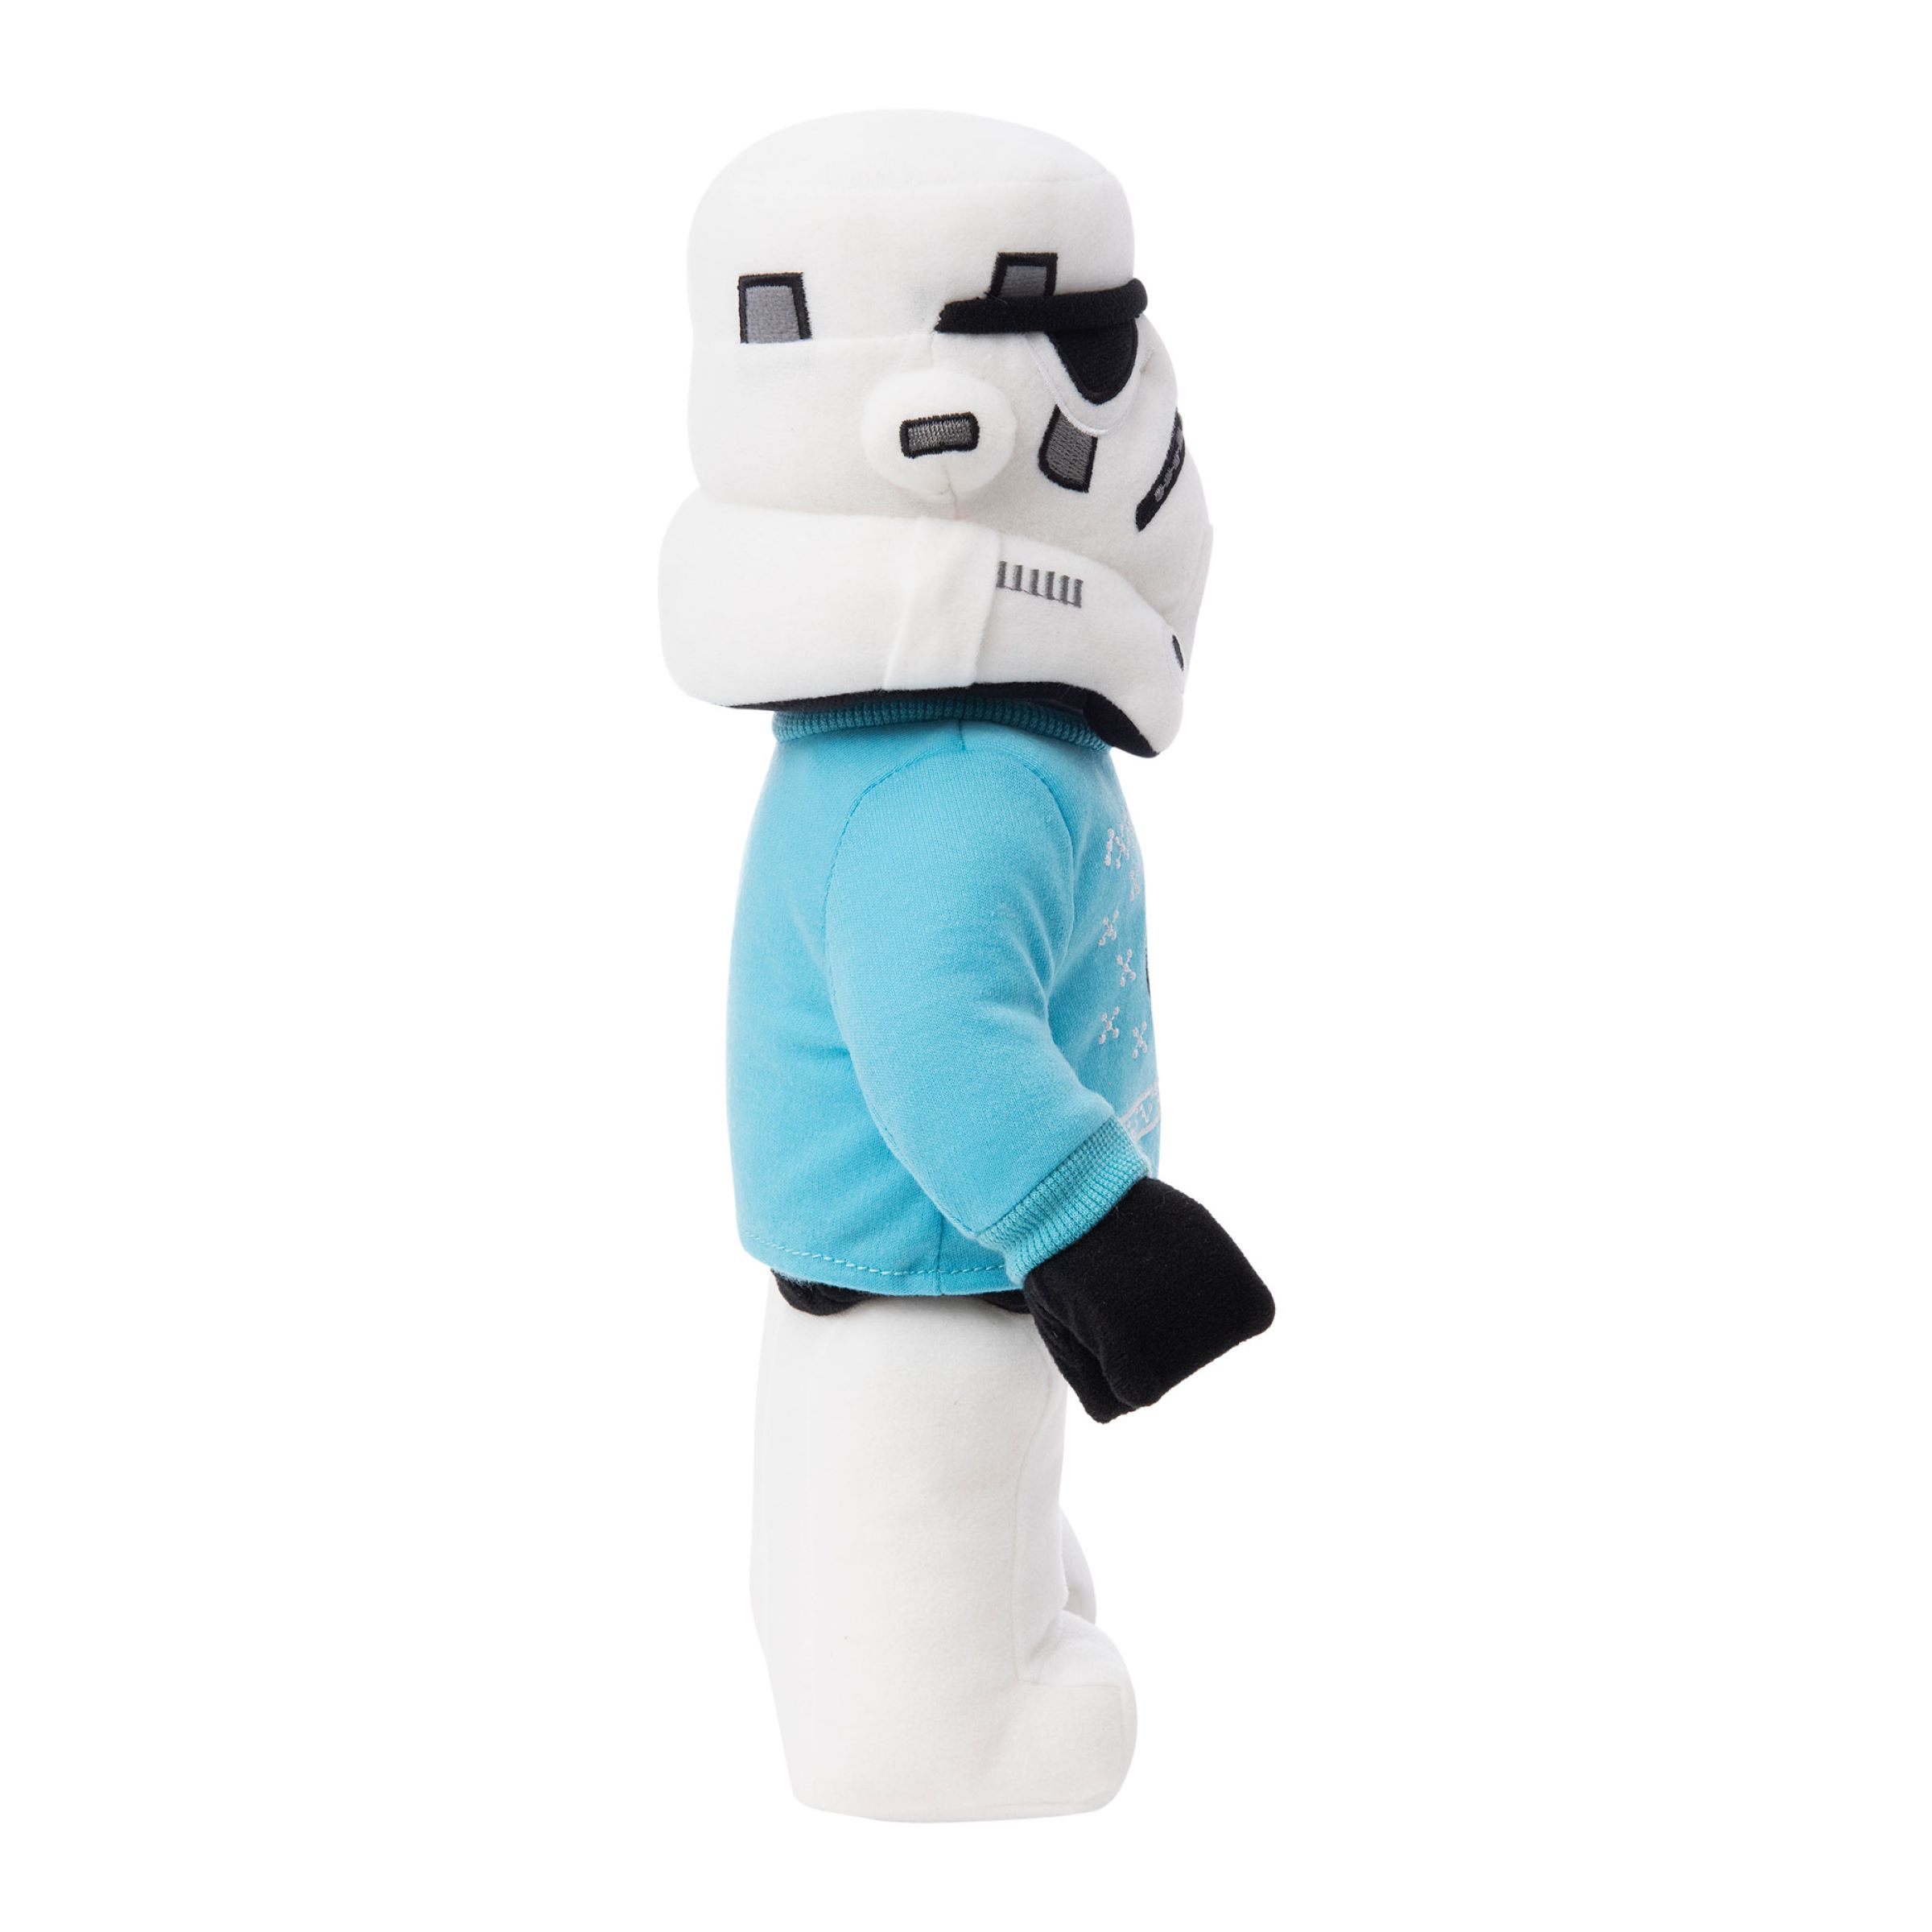 Stormtrooper™ Plush 5007137 | Star Wars™ | Buy online at the Official LEGO®  Shop US